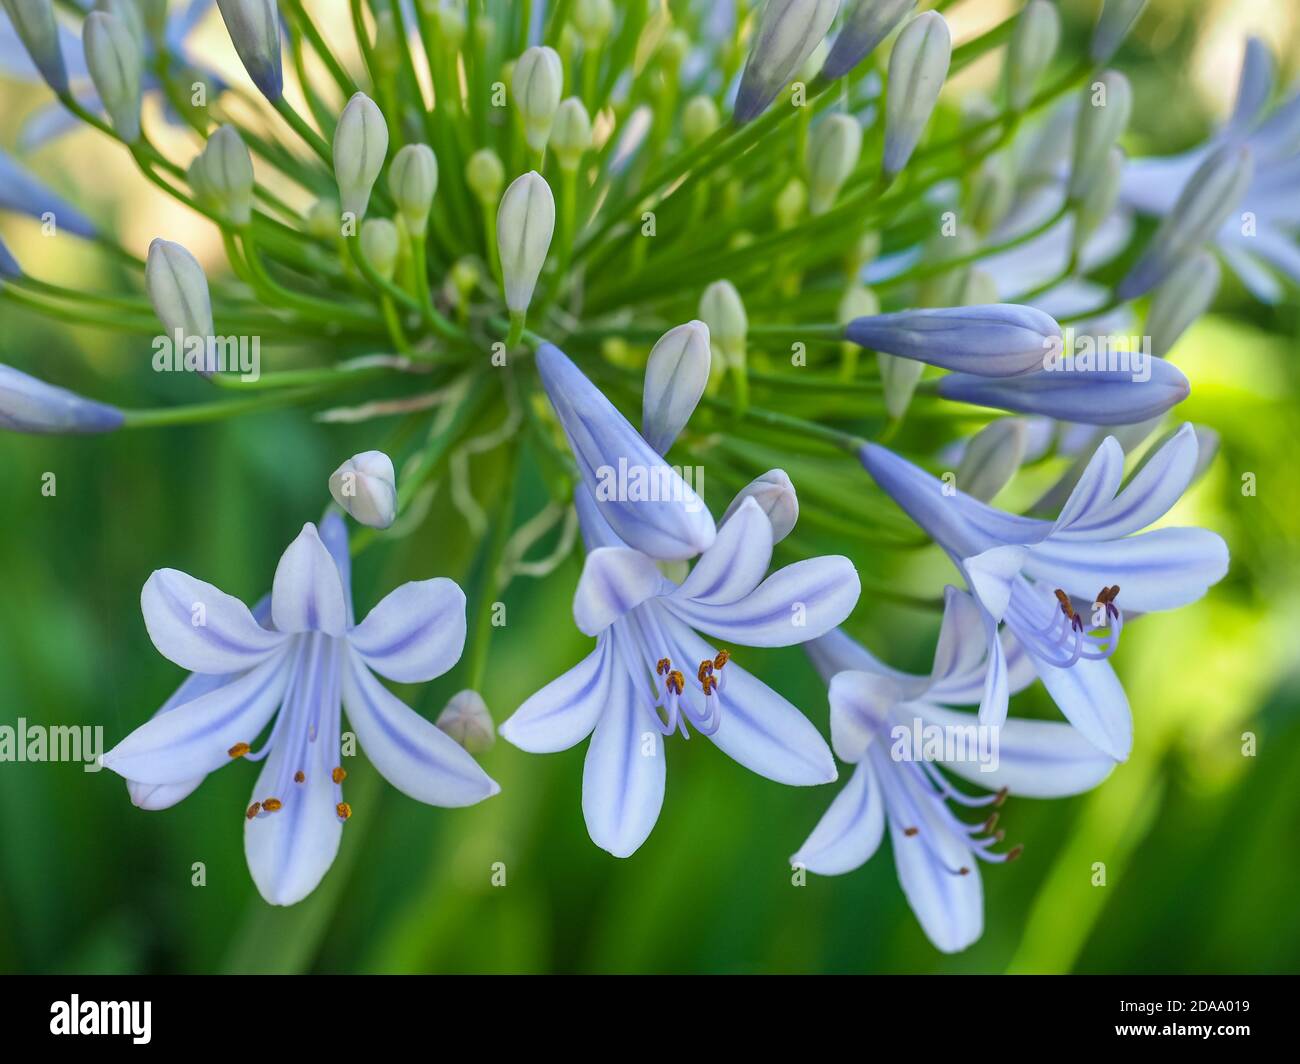 Agapanthus praecox, African lily or Lily of the Nile is popular garden plant in Amaryllidaceae family. Common agapanthus have light blue flowers. Stock Photo